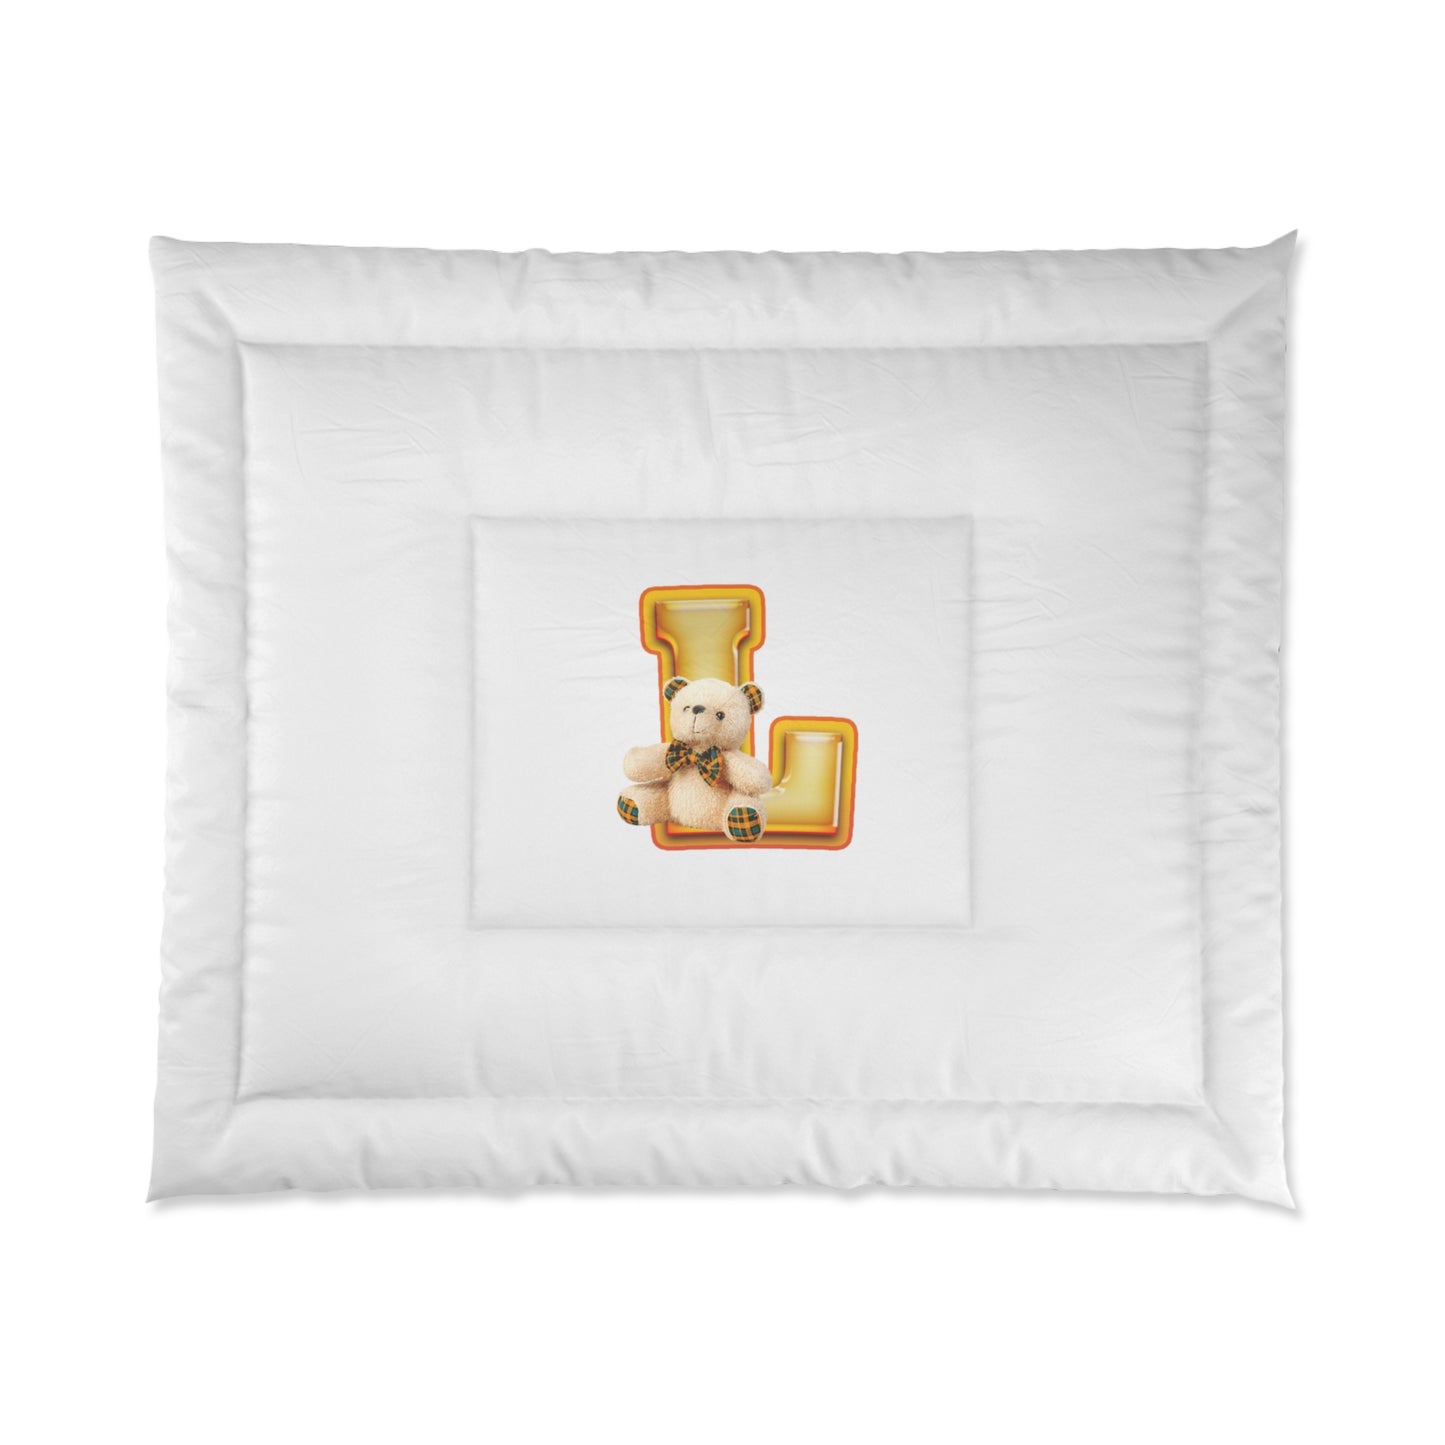 Adorable Collection of Baby Blankets Featuring the Letter L – Soft, Safe, and Perfect for Little Ones!"